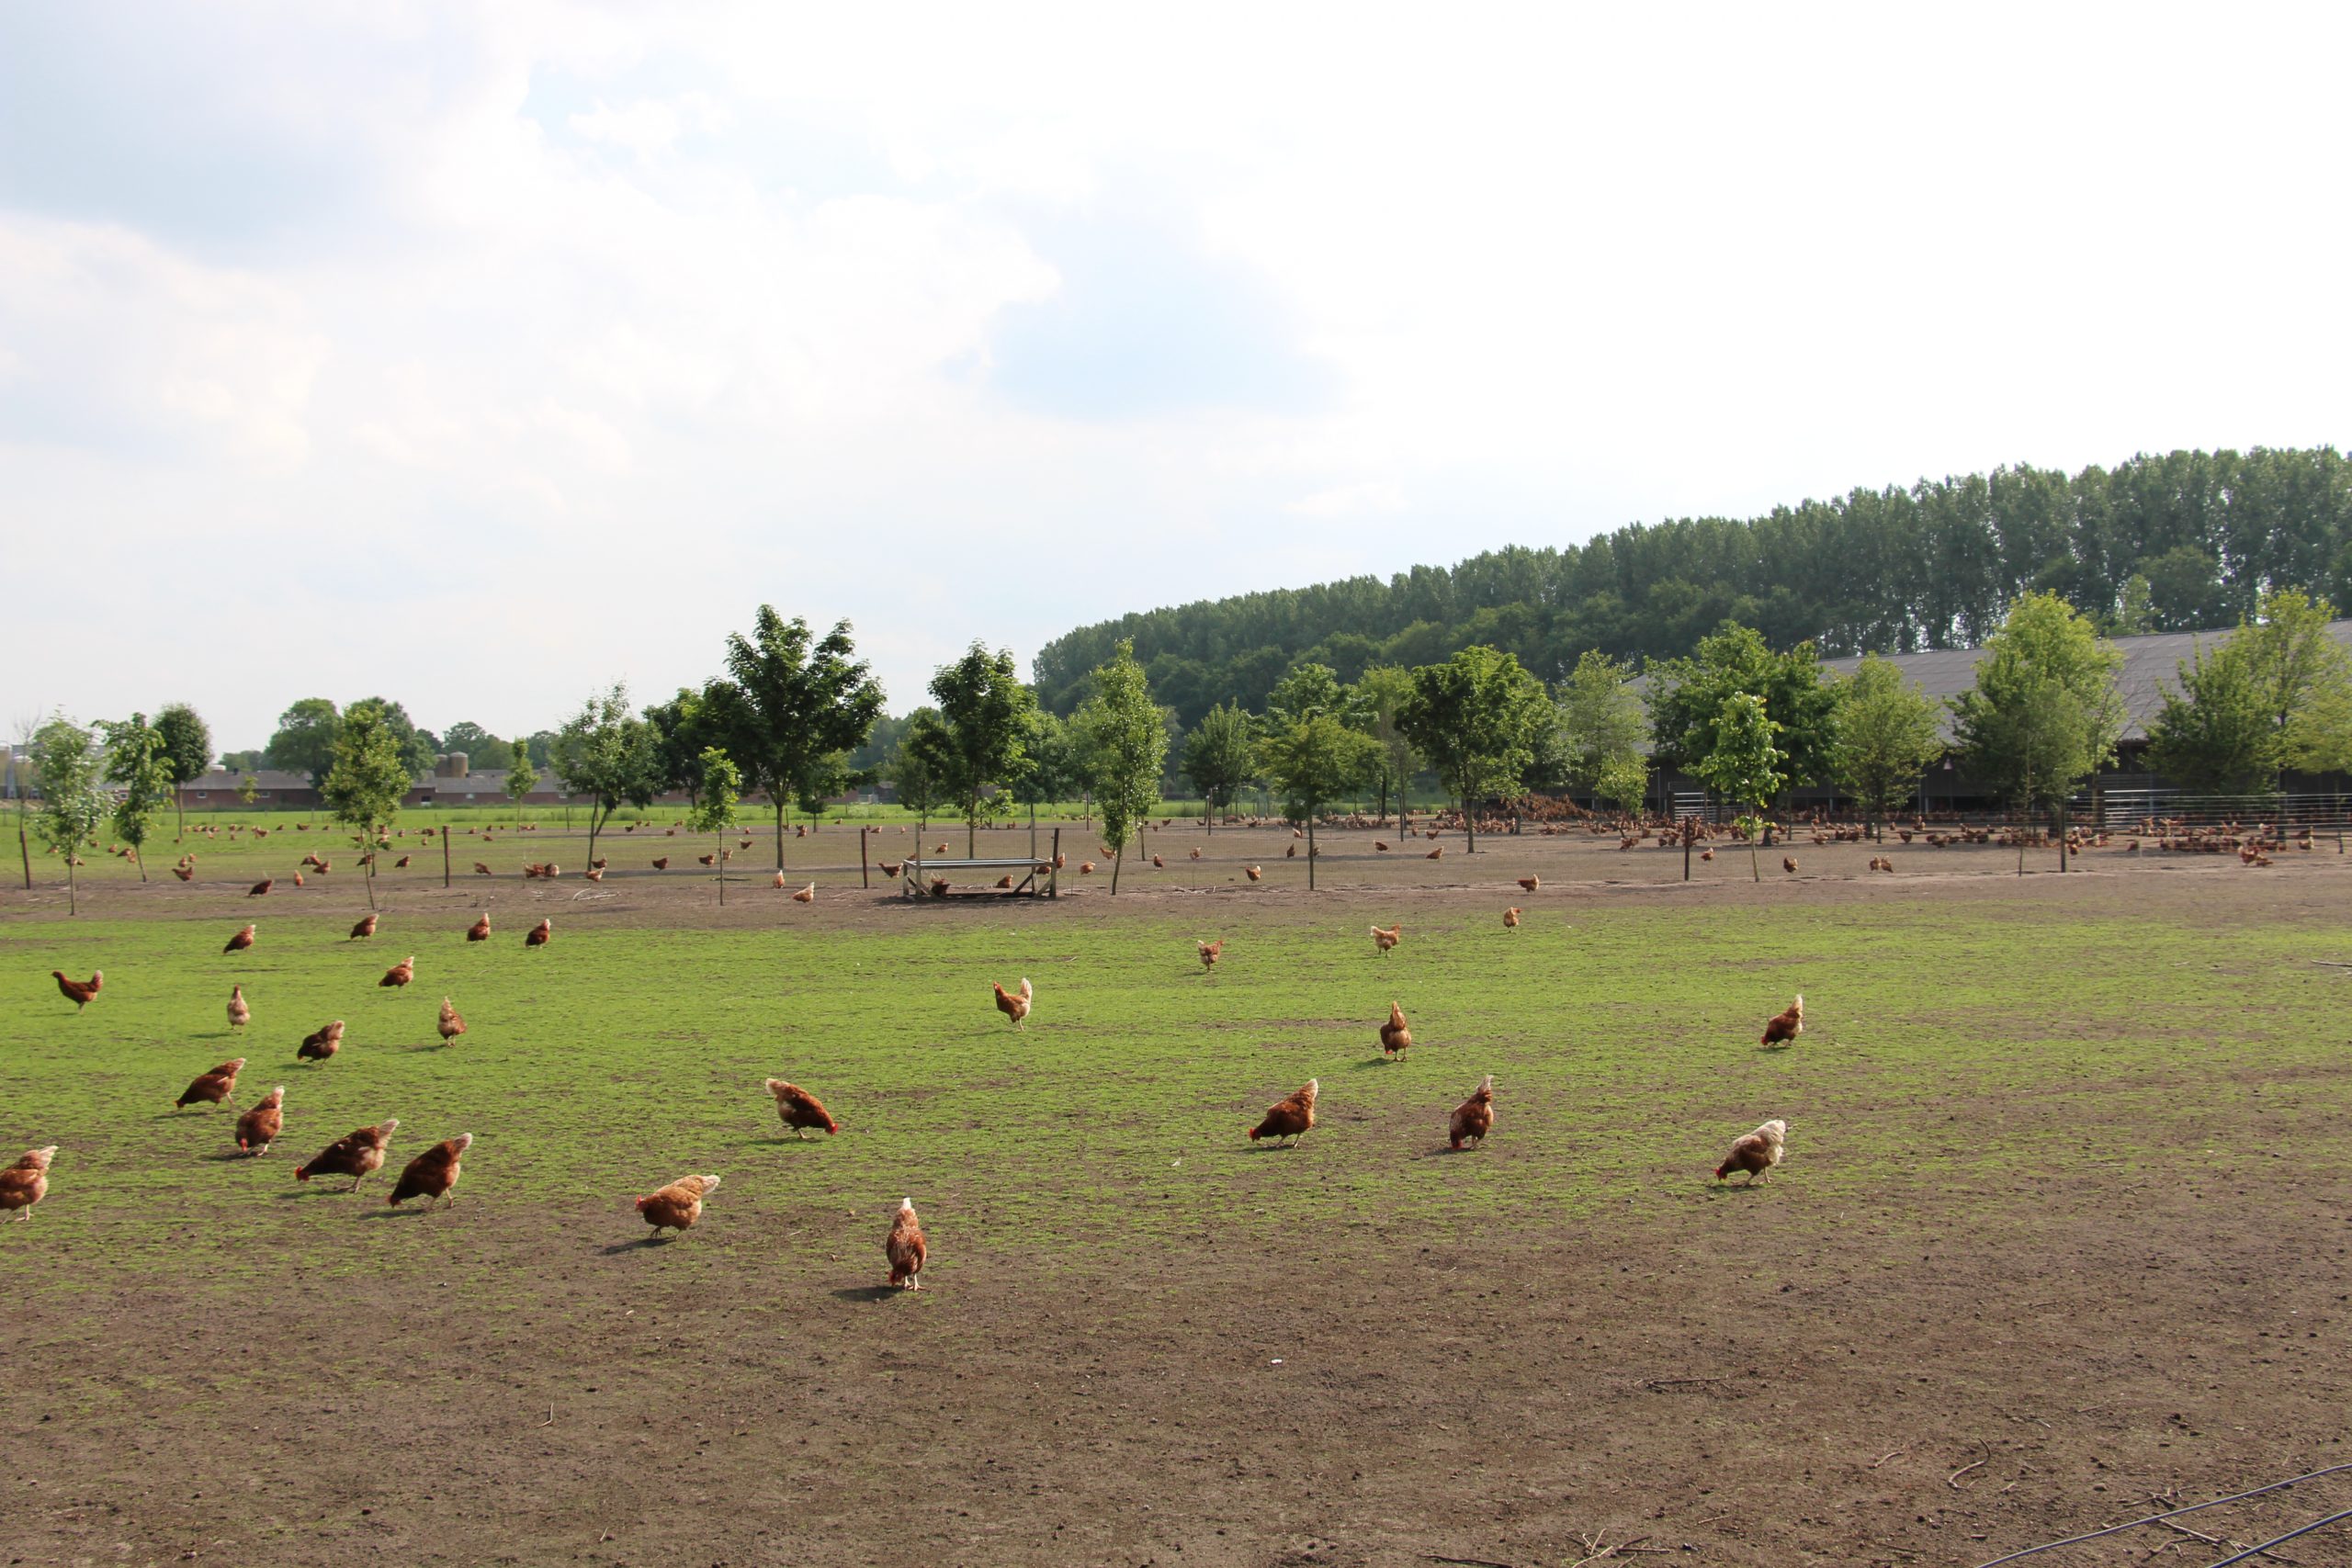 Confinement for poultry ended in The Netherlands